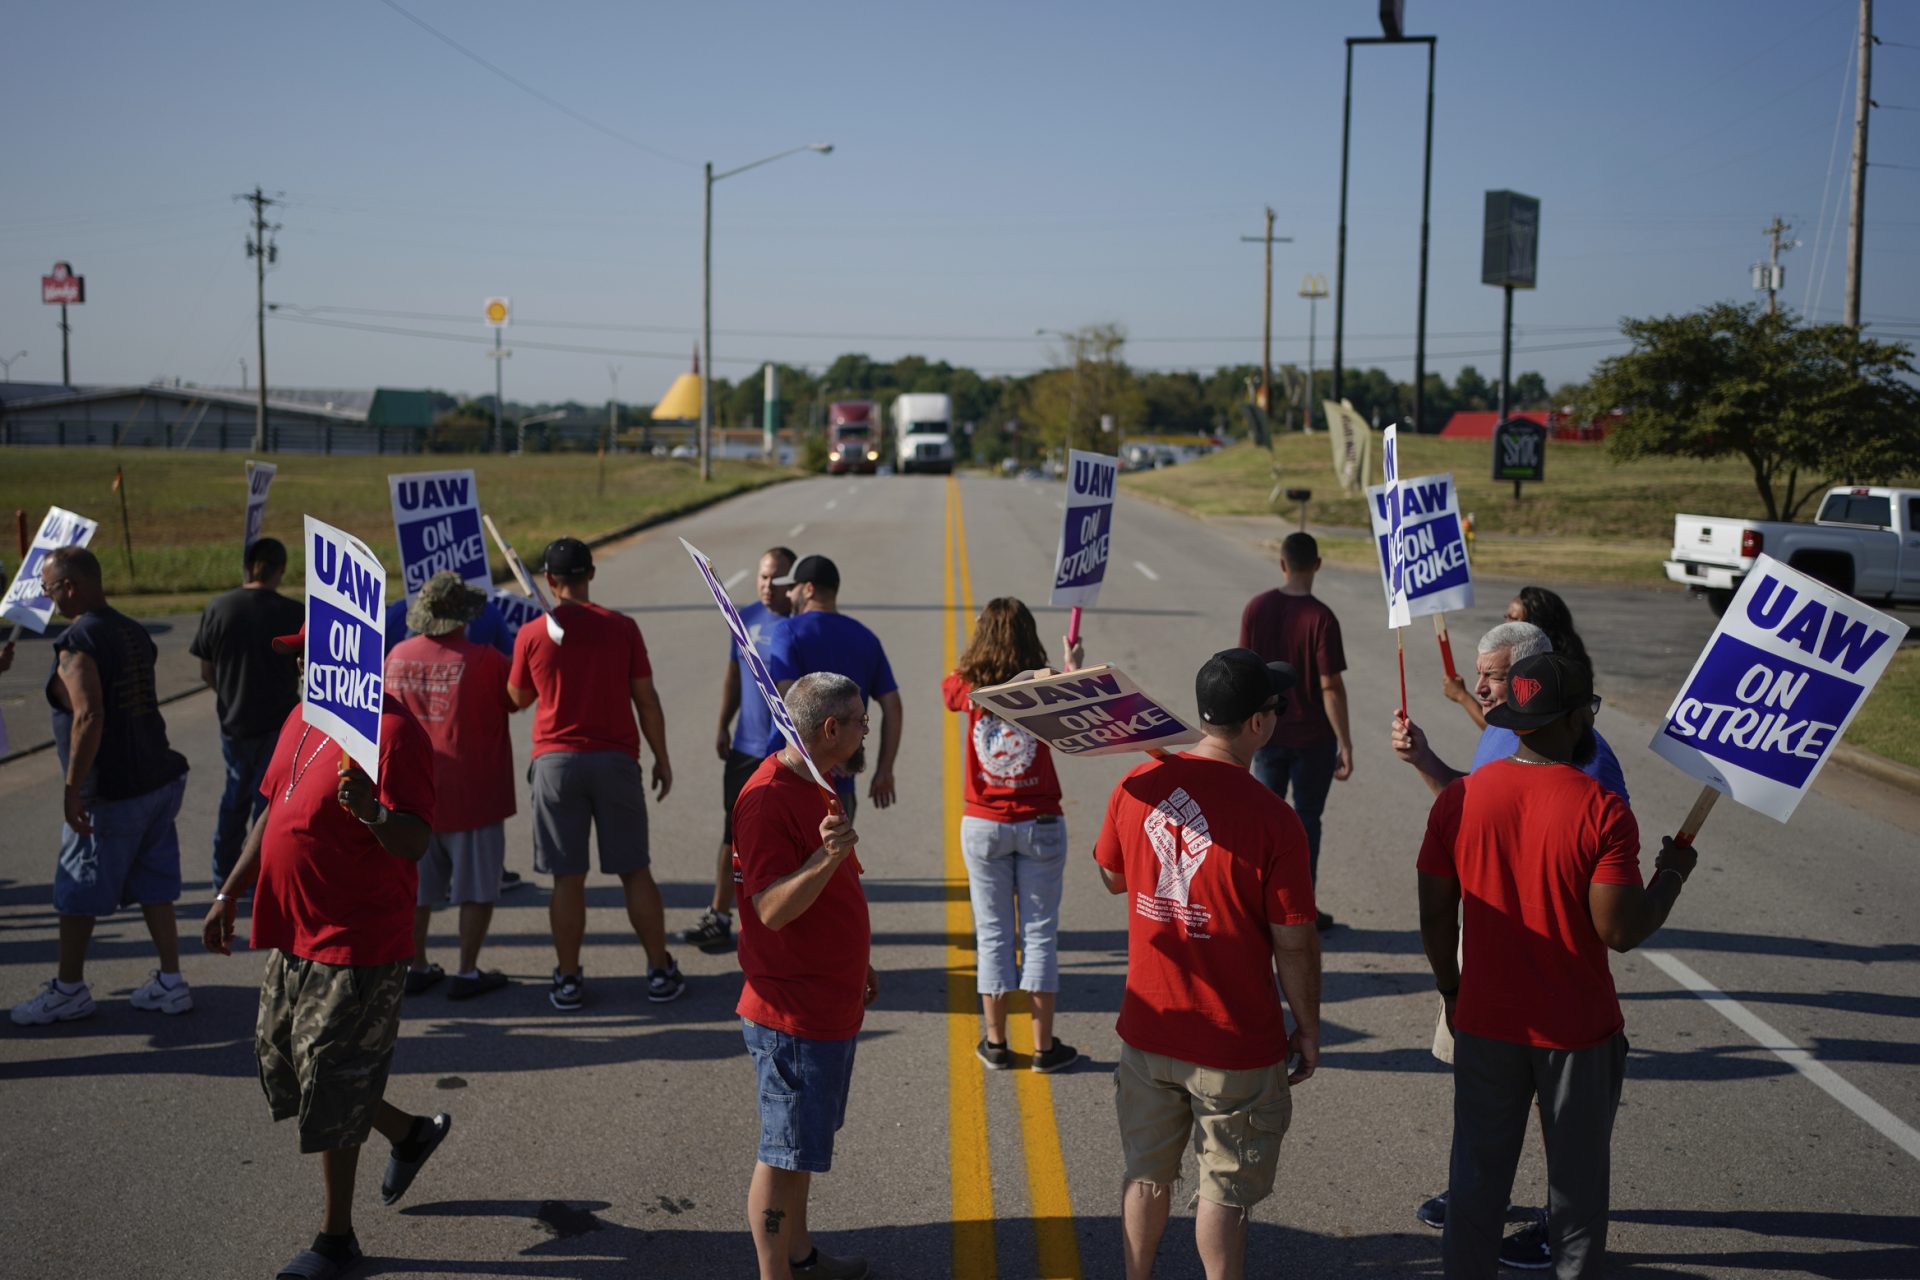 Striking plant workers block the passage of two trucks outside the General Motor assembly plant in Bowling Green, Ky, Monday, Sept. 16, 2019. More than 49,000 members of the United Auto Workers walked off General Motors factory floors or set up picket lines early Monday as contract talks with the company deteriorated into a strike.